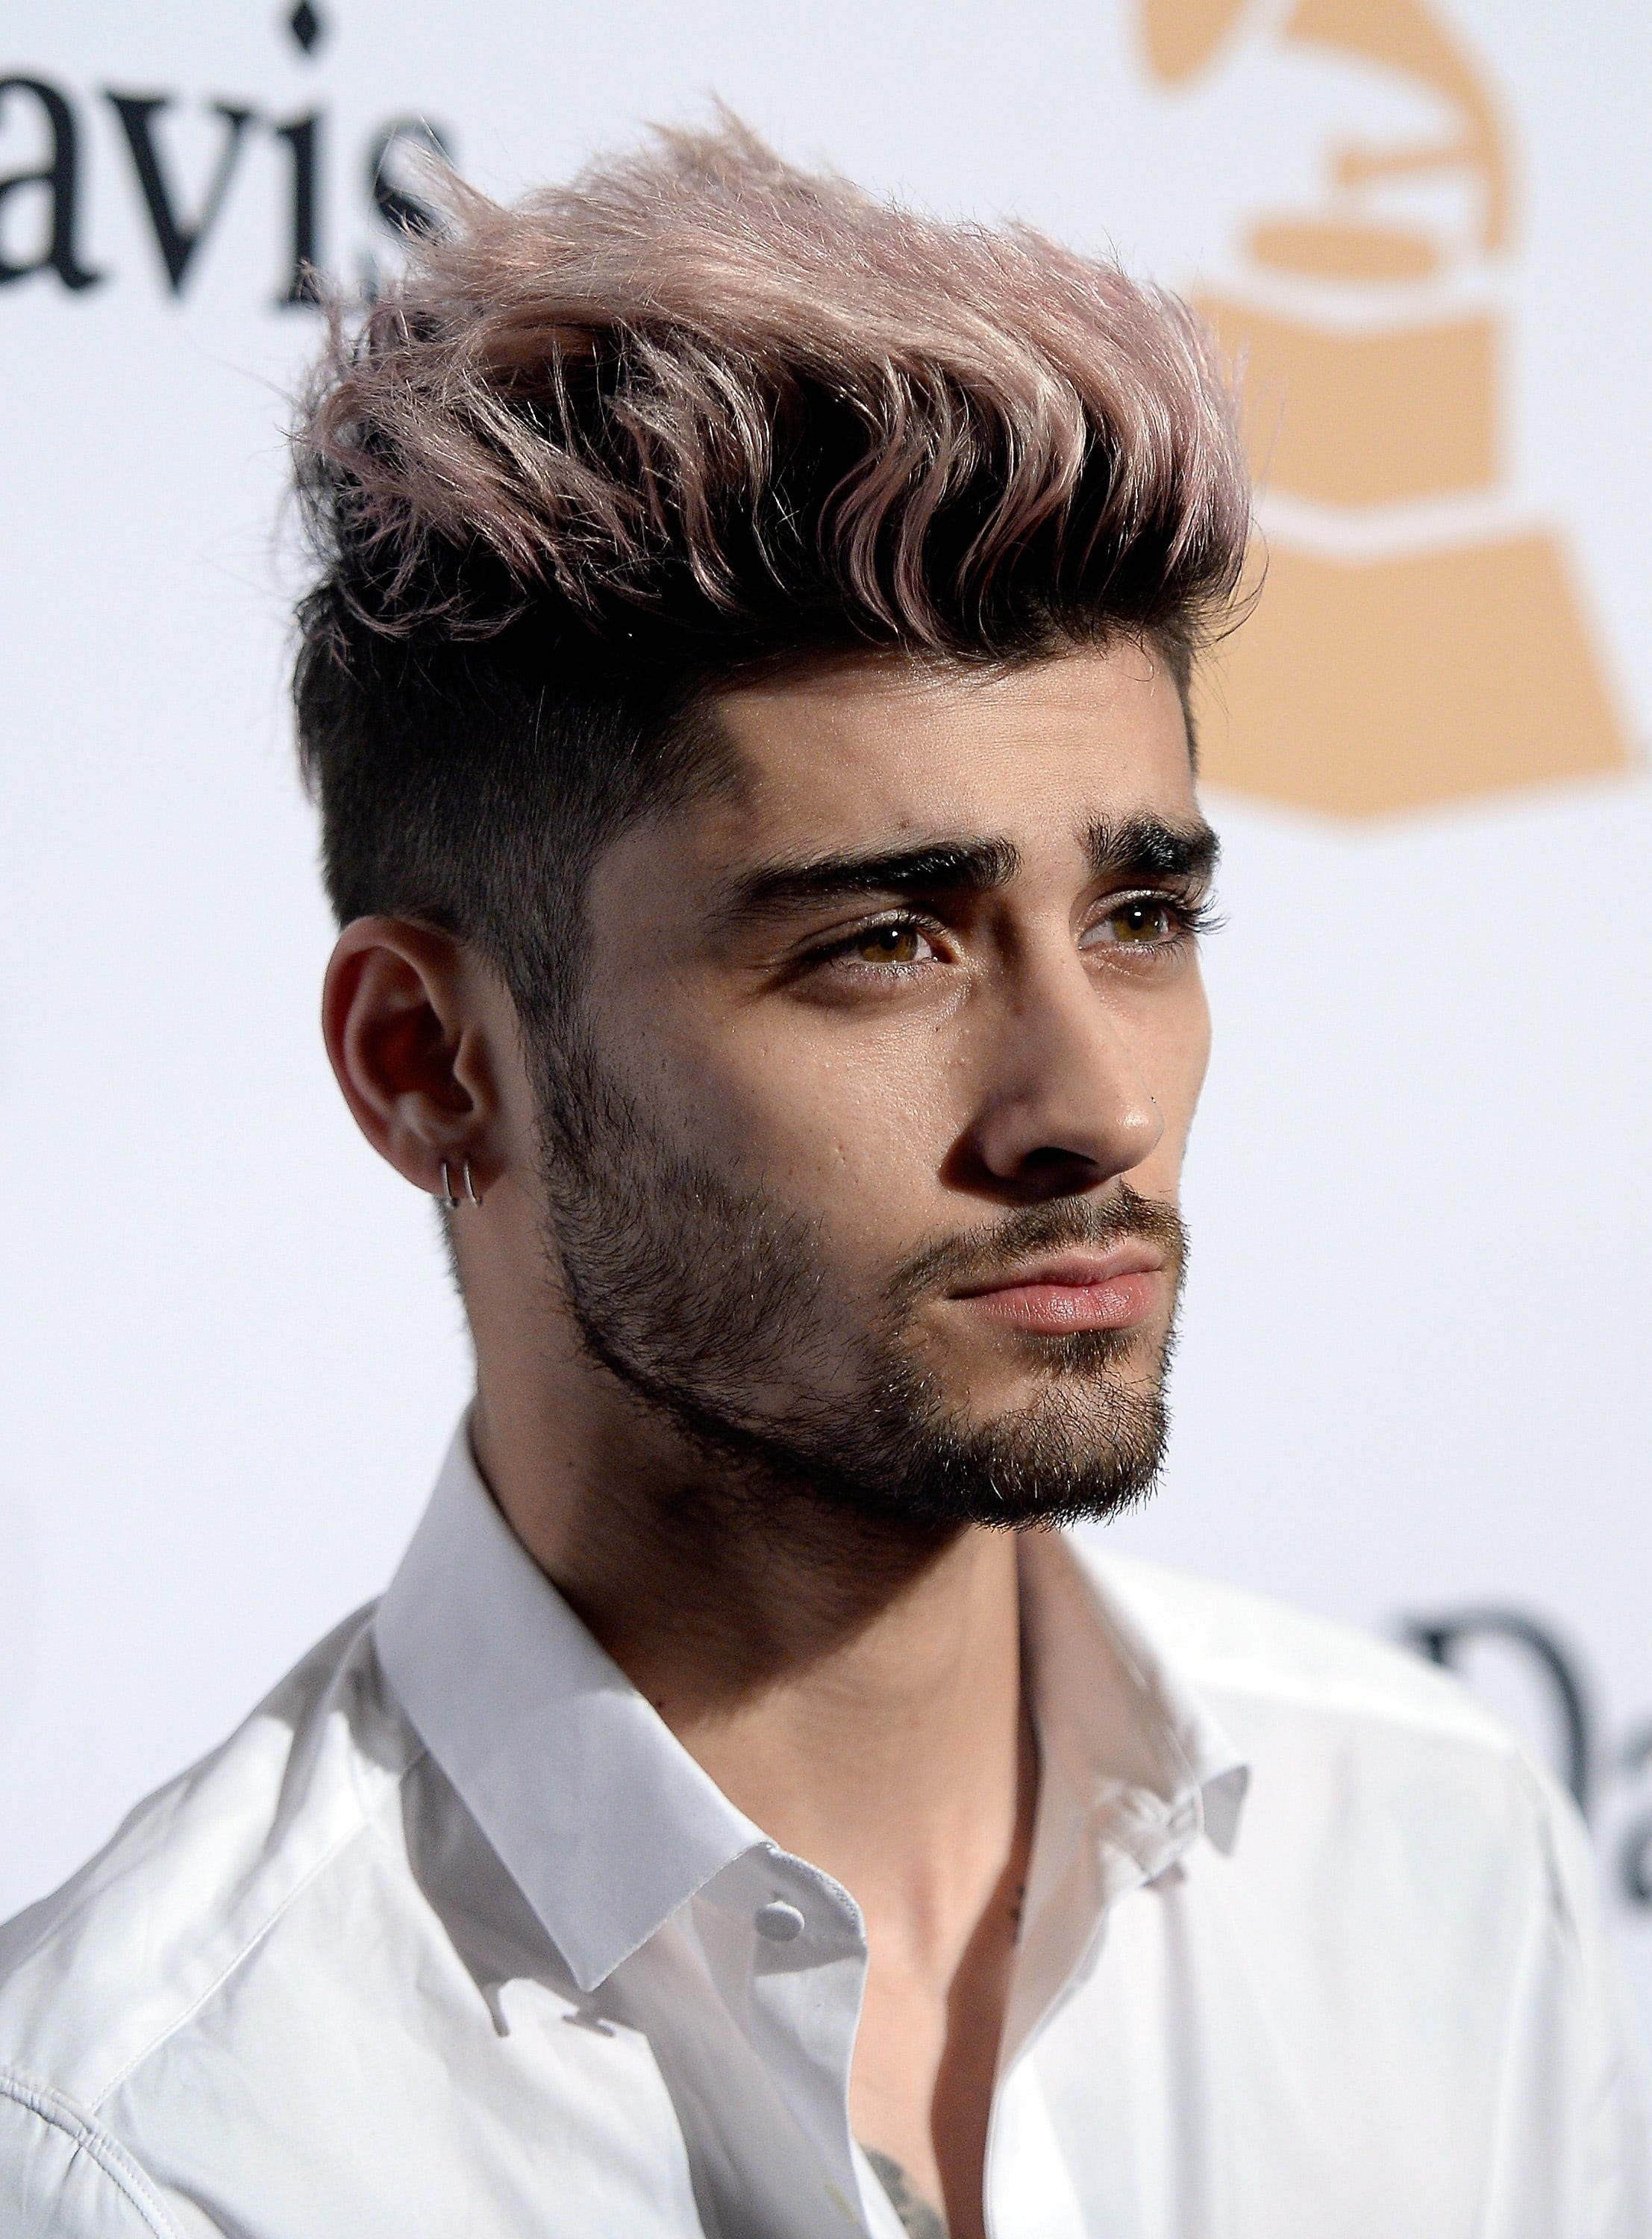 Zayn Malik credits life in Pennsylvania, with home in Bucks County, for album inspiration